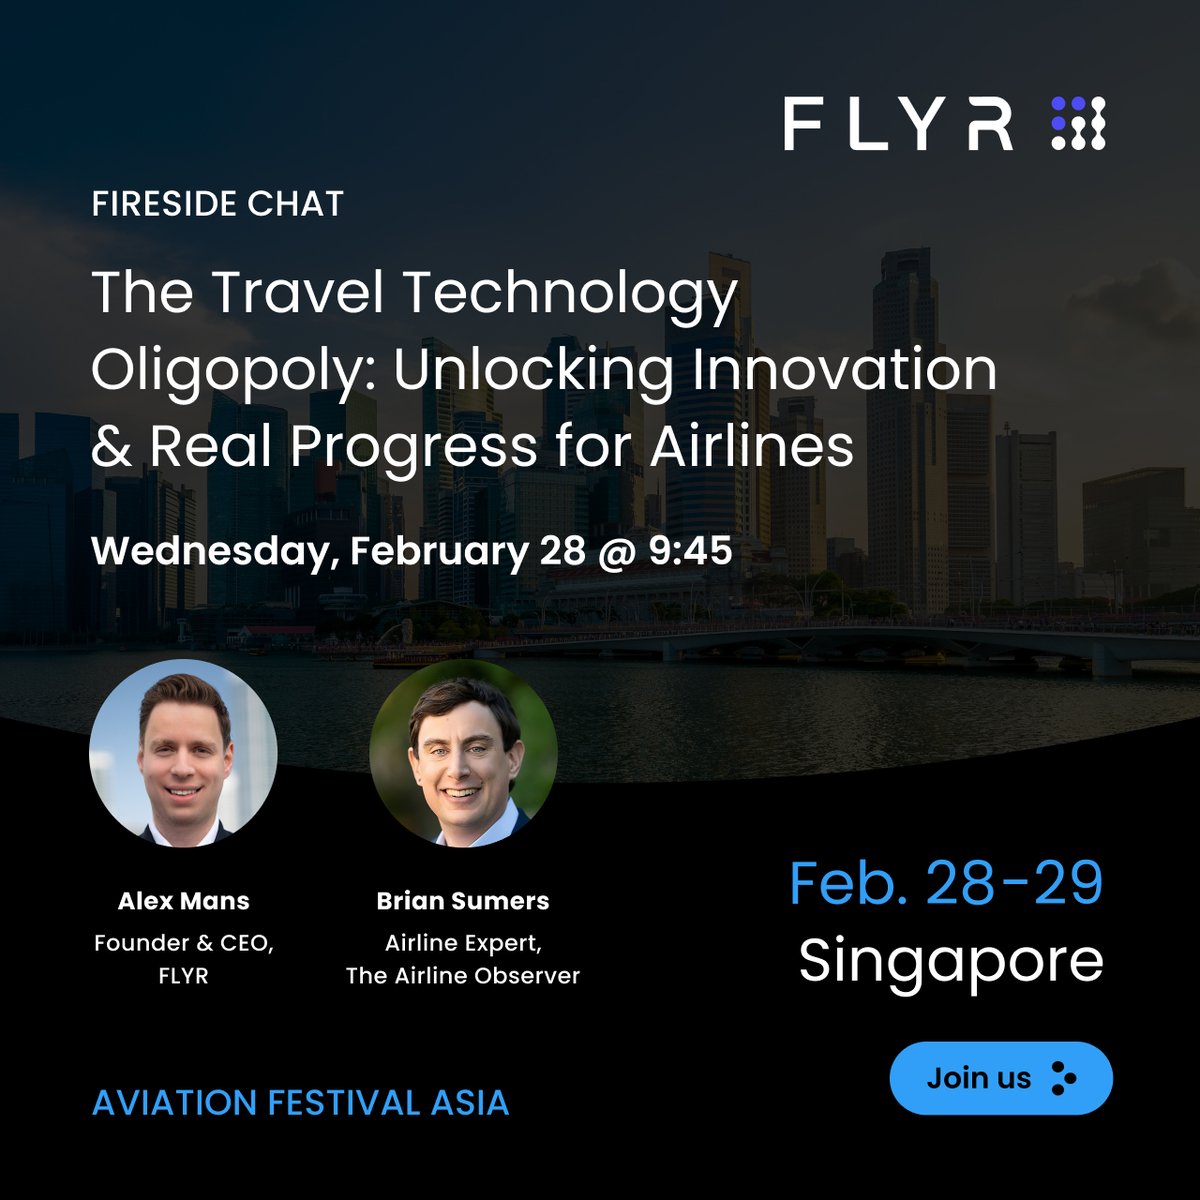 Join us at Aviation Festival Asia in Singapore on February 28, to hear a thought-provoking fireside chat with Alex Mans from FLYR and Brian Sumers from Airline Observer as they delve into unlocking innovation and how to bring mission-critical systems into the future.